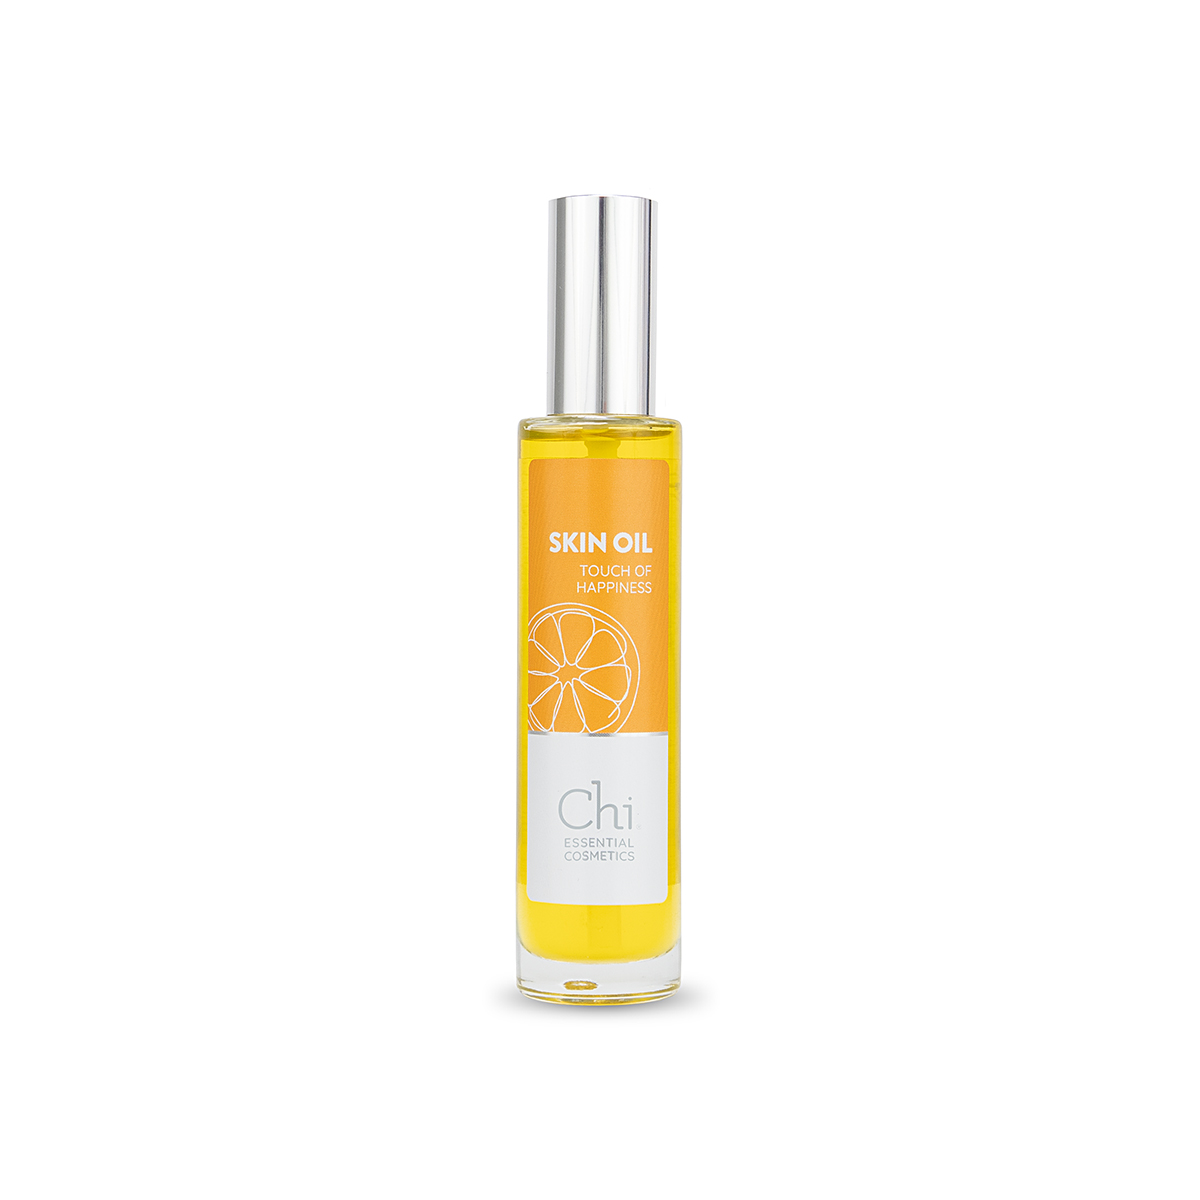 a touch of happiness - skin oil